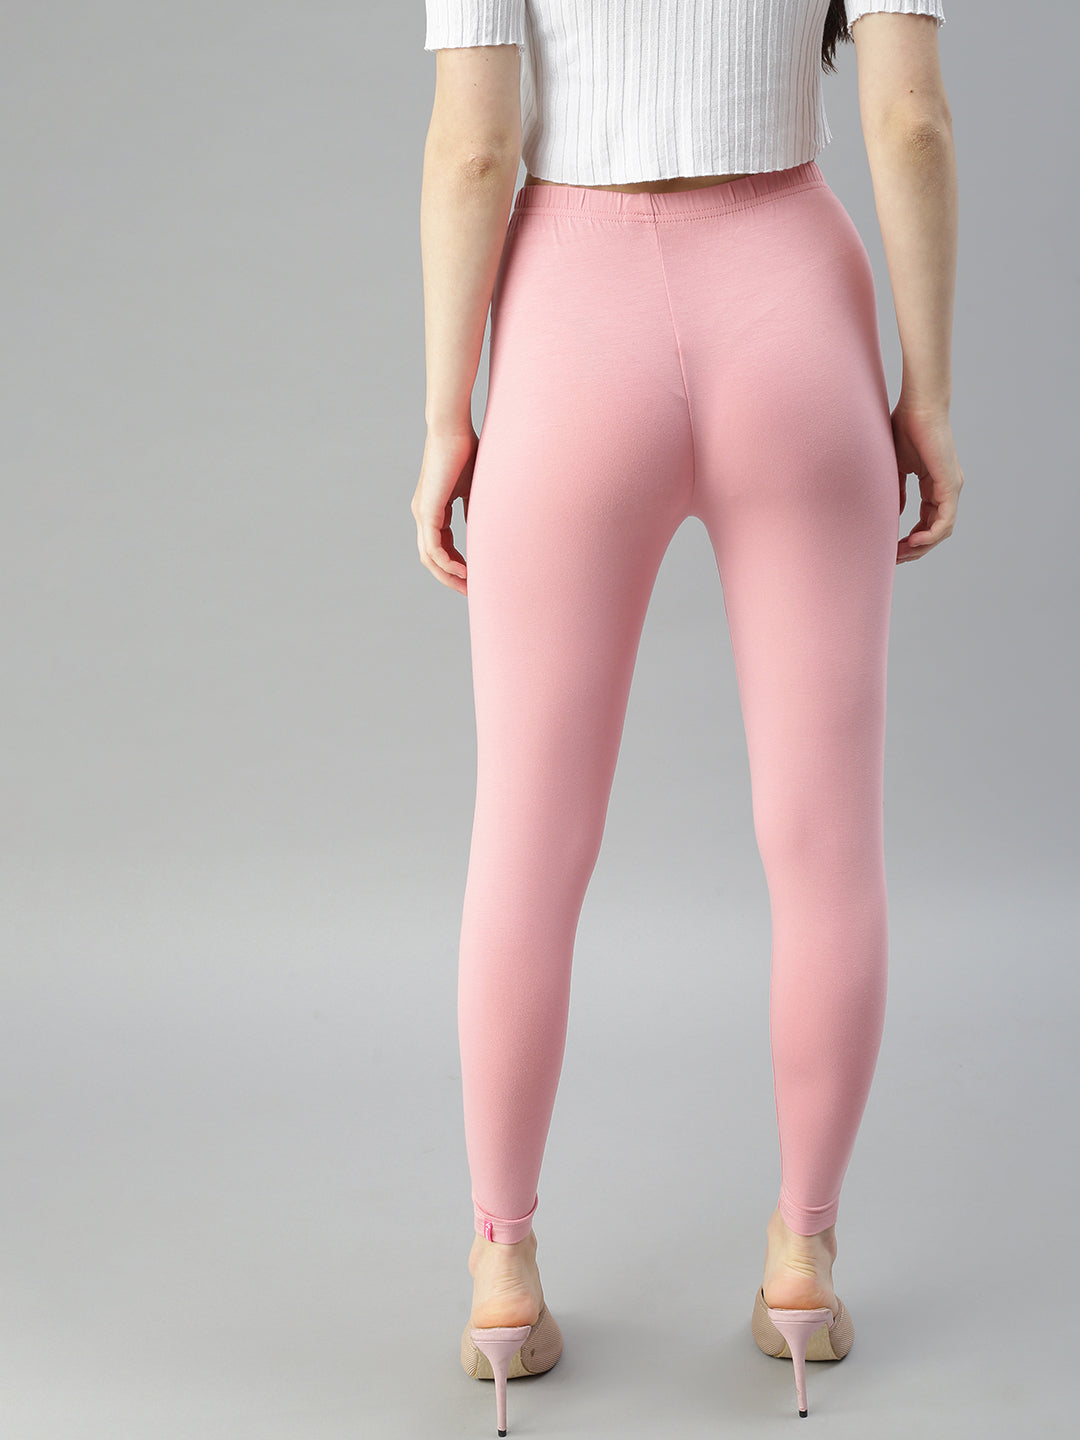 Shop Prisma's Dusty Pink Ankle Leggings for Comfortable Style